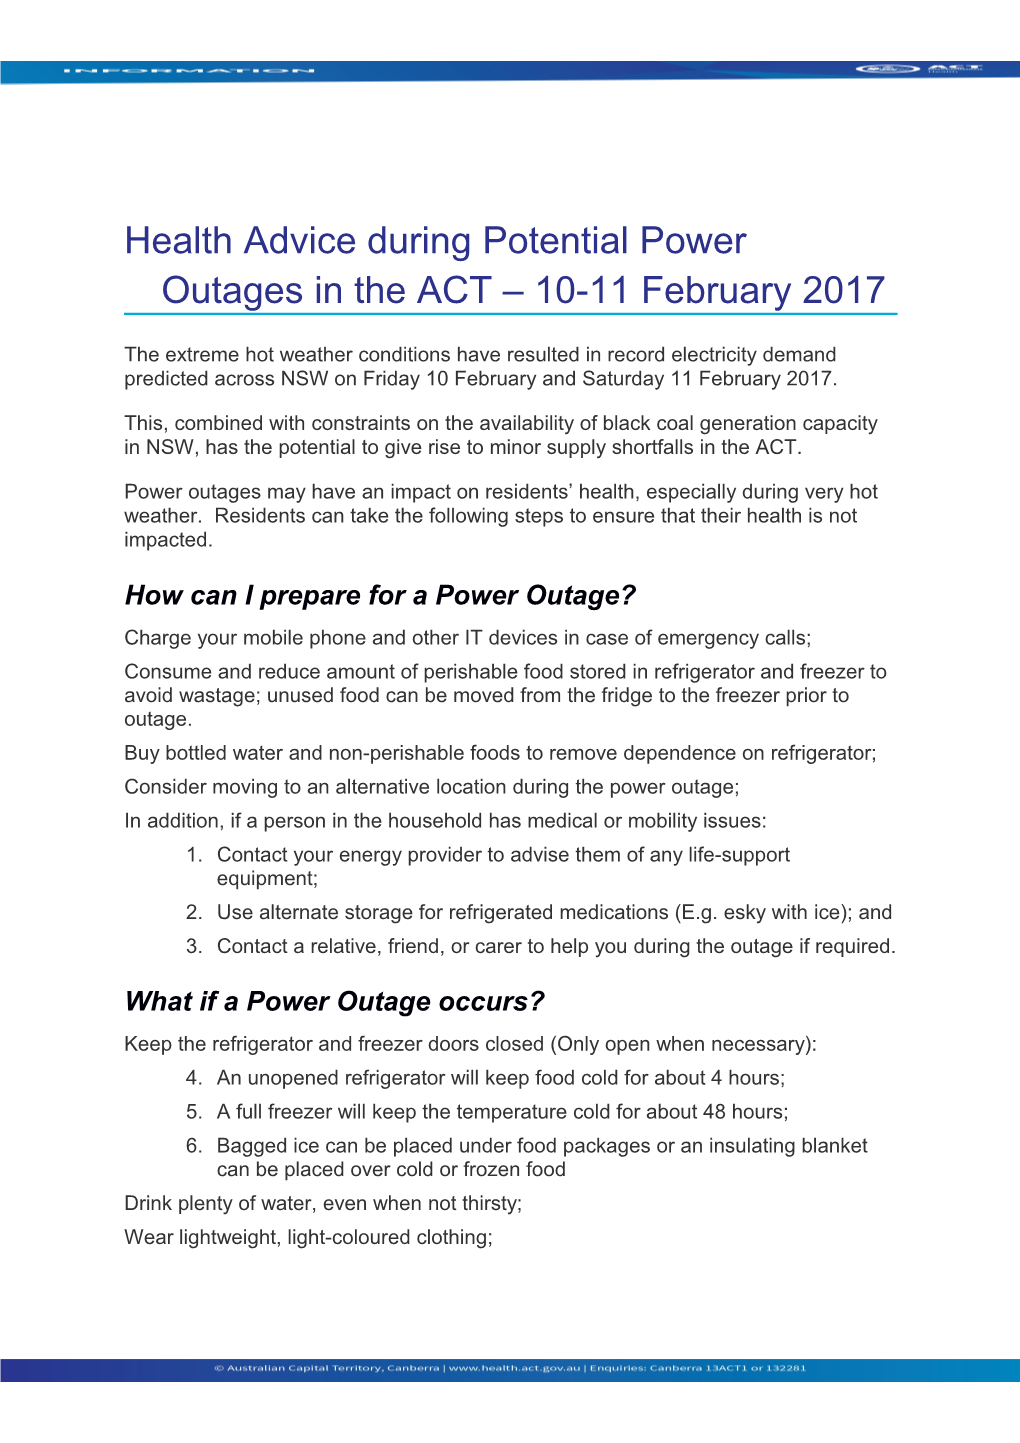 Health Advice During Potential Power Outages in the ACT 10-11 February 2017